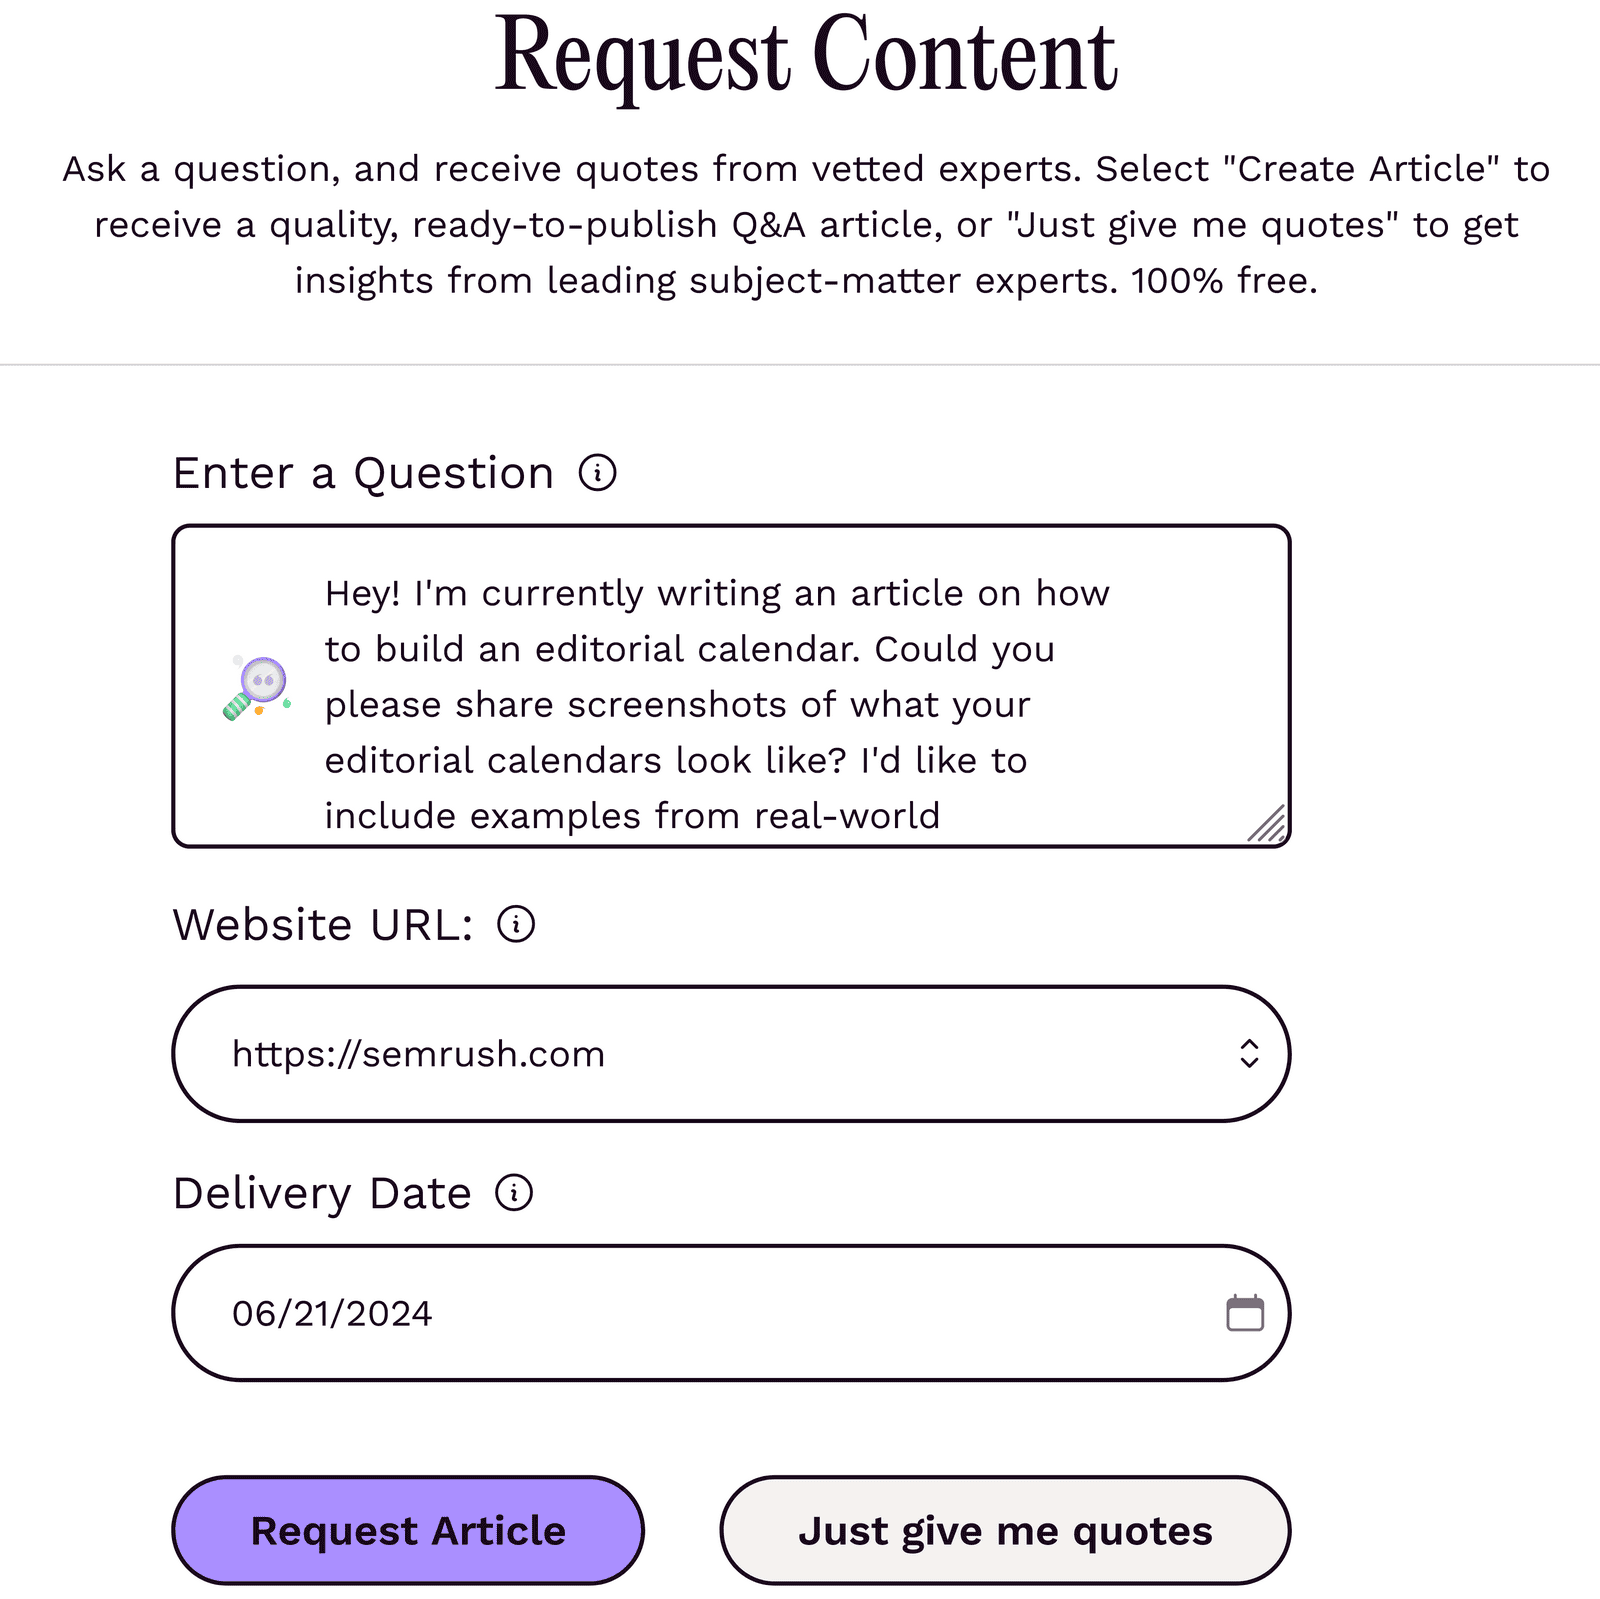 Featured's "Request Content" interface with fields for a question, website URL, and delivery date.